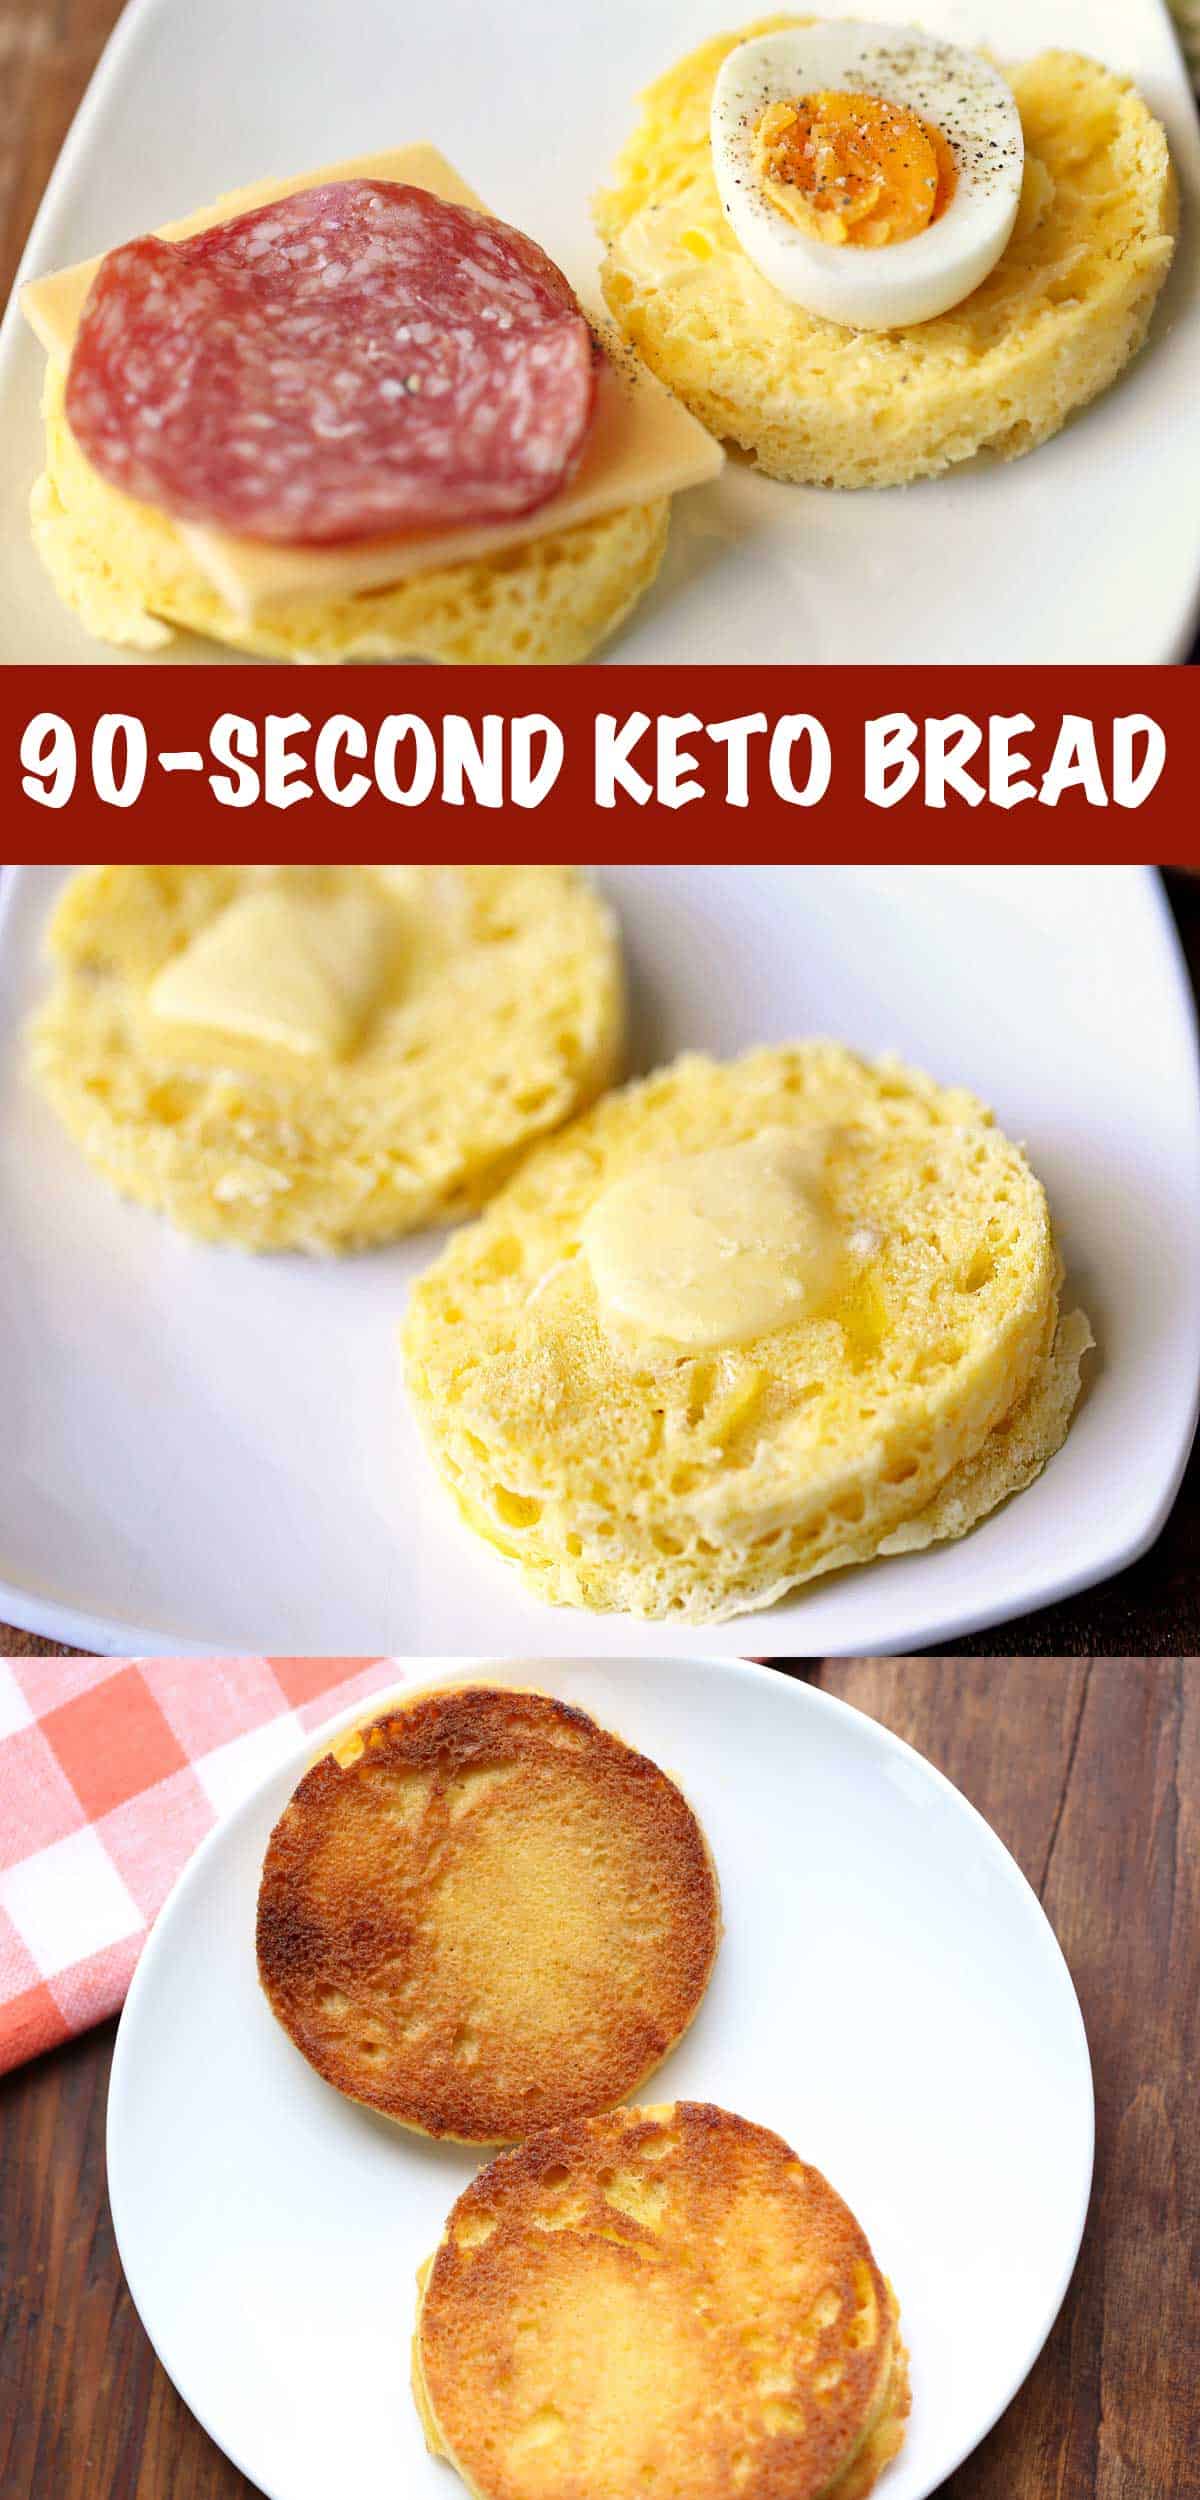 A three-photo collage of 90-second keto bread, shown toasted, buttered, and topped with various toppings. 